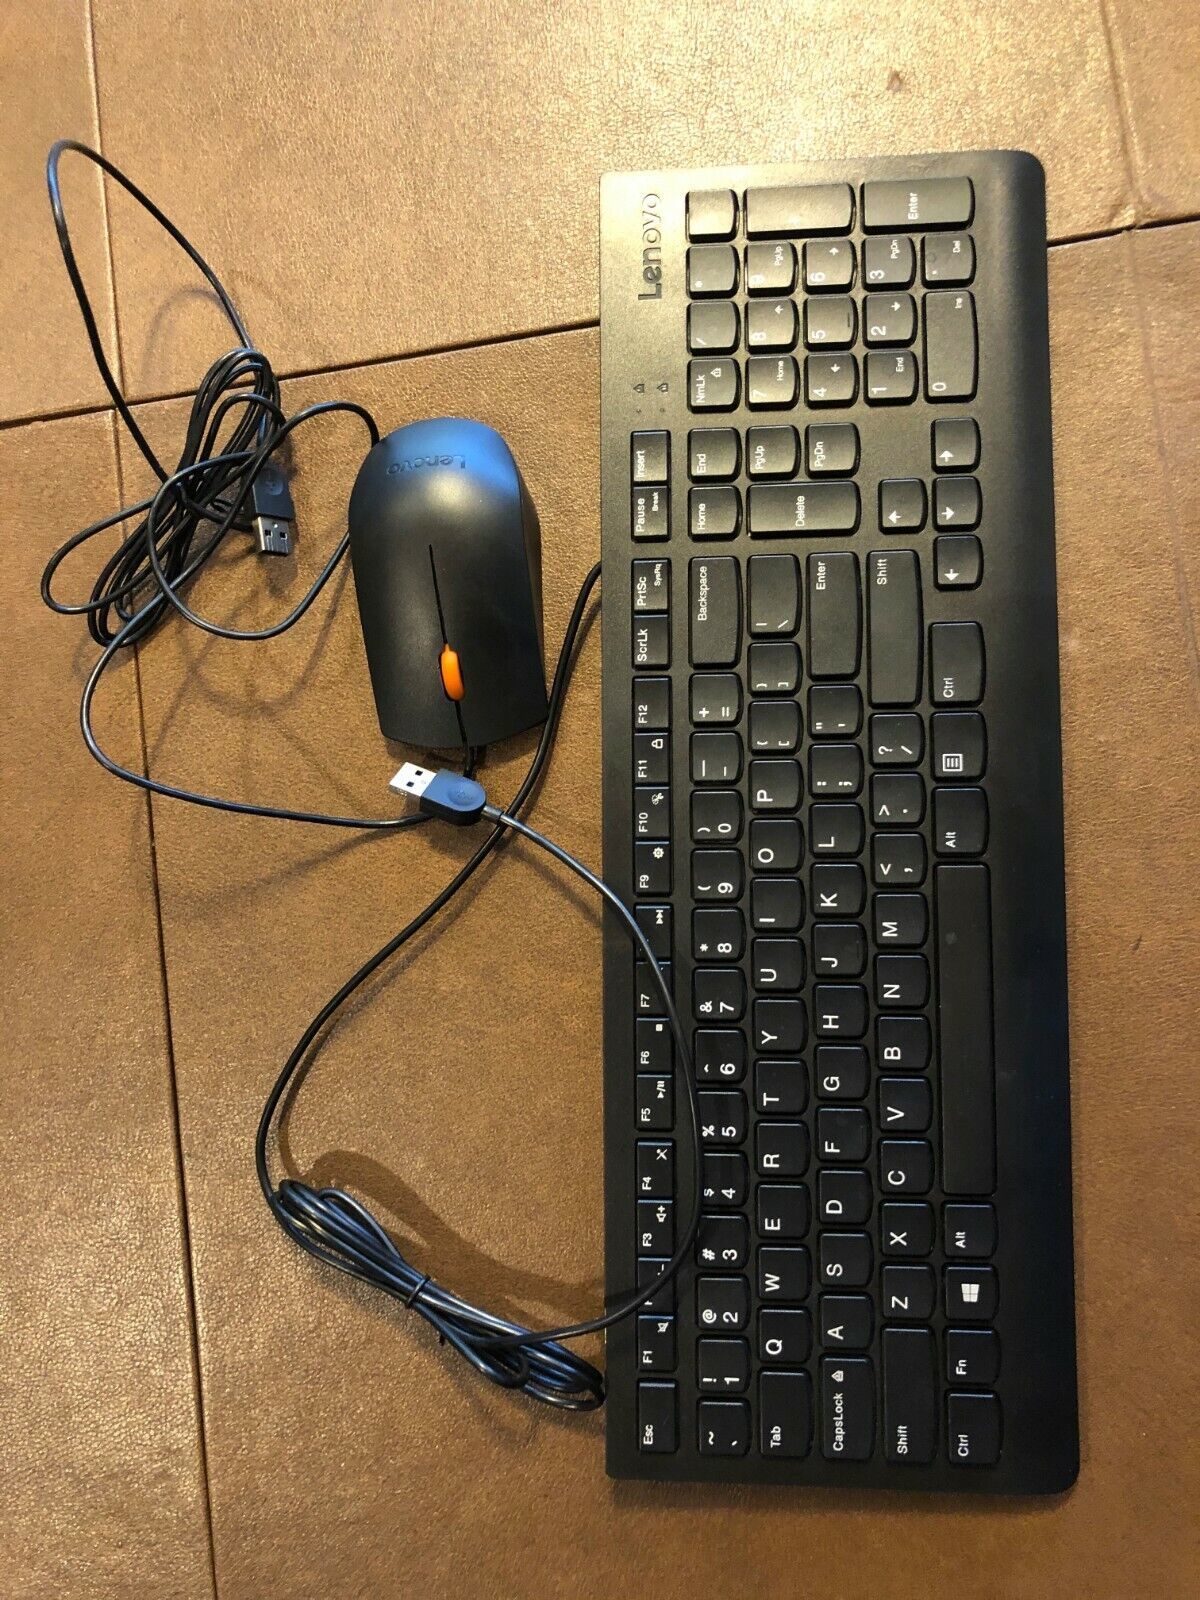 Lenovo Wired Keyboard and Mouse New Open Box For Desktop and Laptop Computers - $19.99